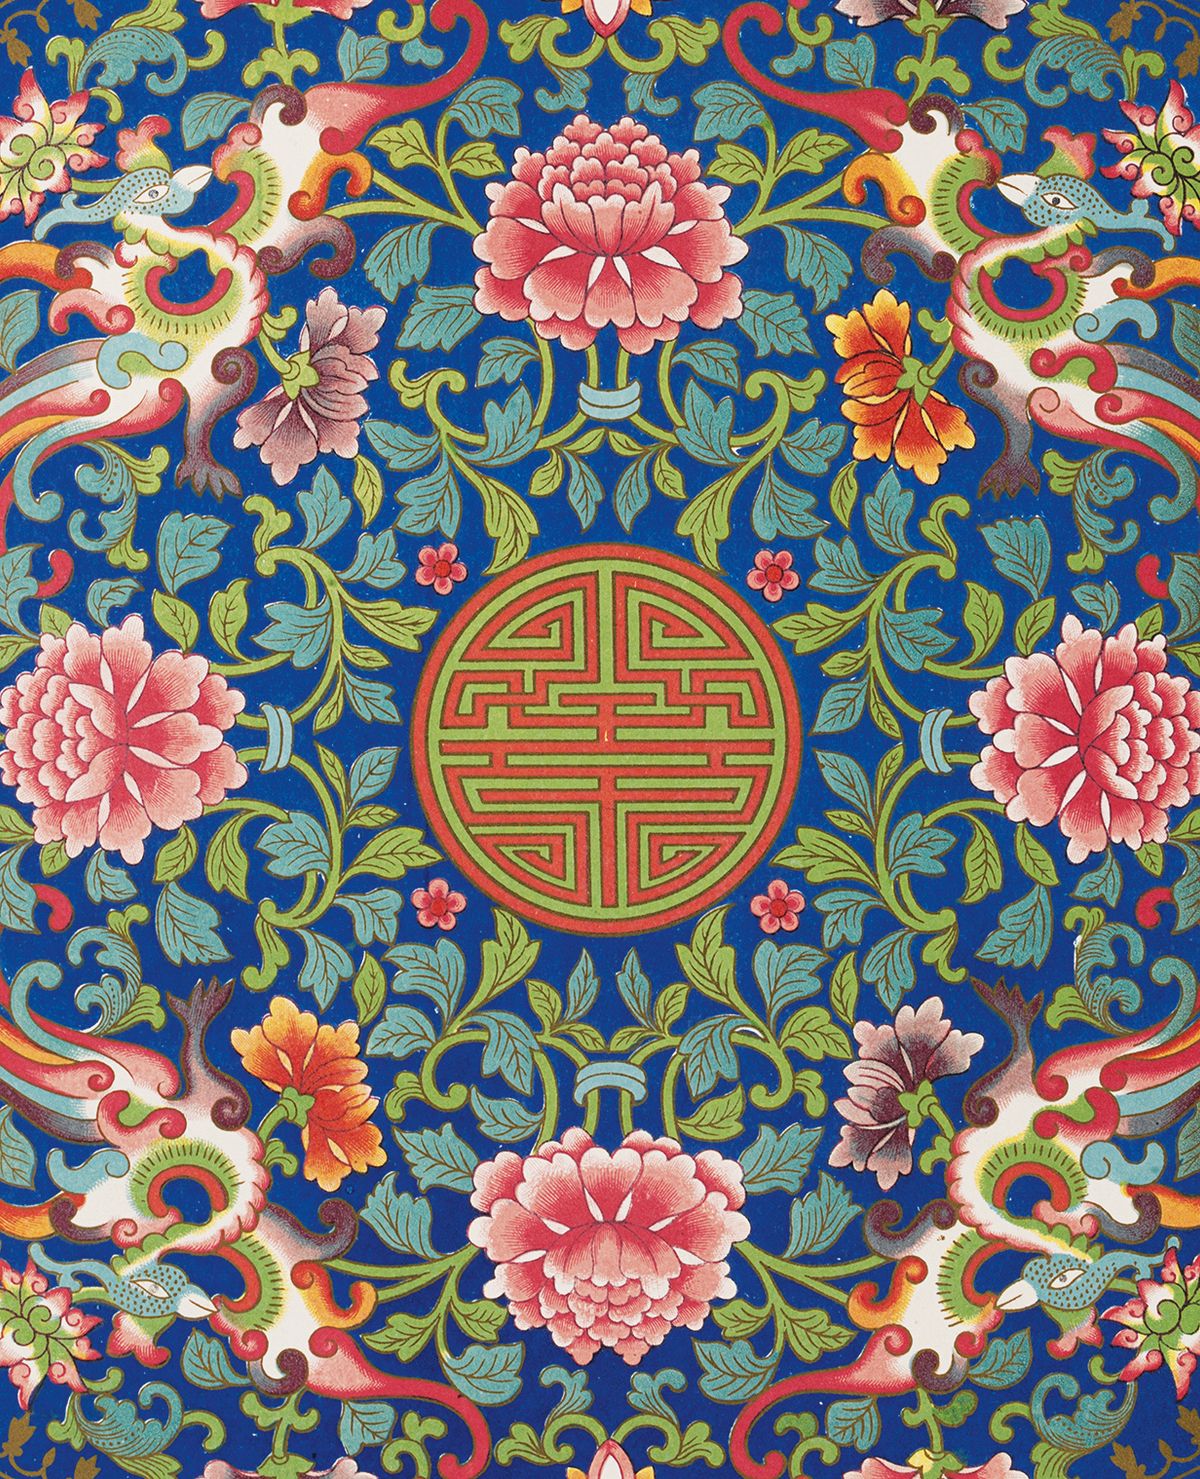 Plate LXXXVI in Owen Jones’s little-known publication Examples of Chinese Ornament (1867). Only 300 copies of the book were printed © Victoria and Albert Museum